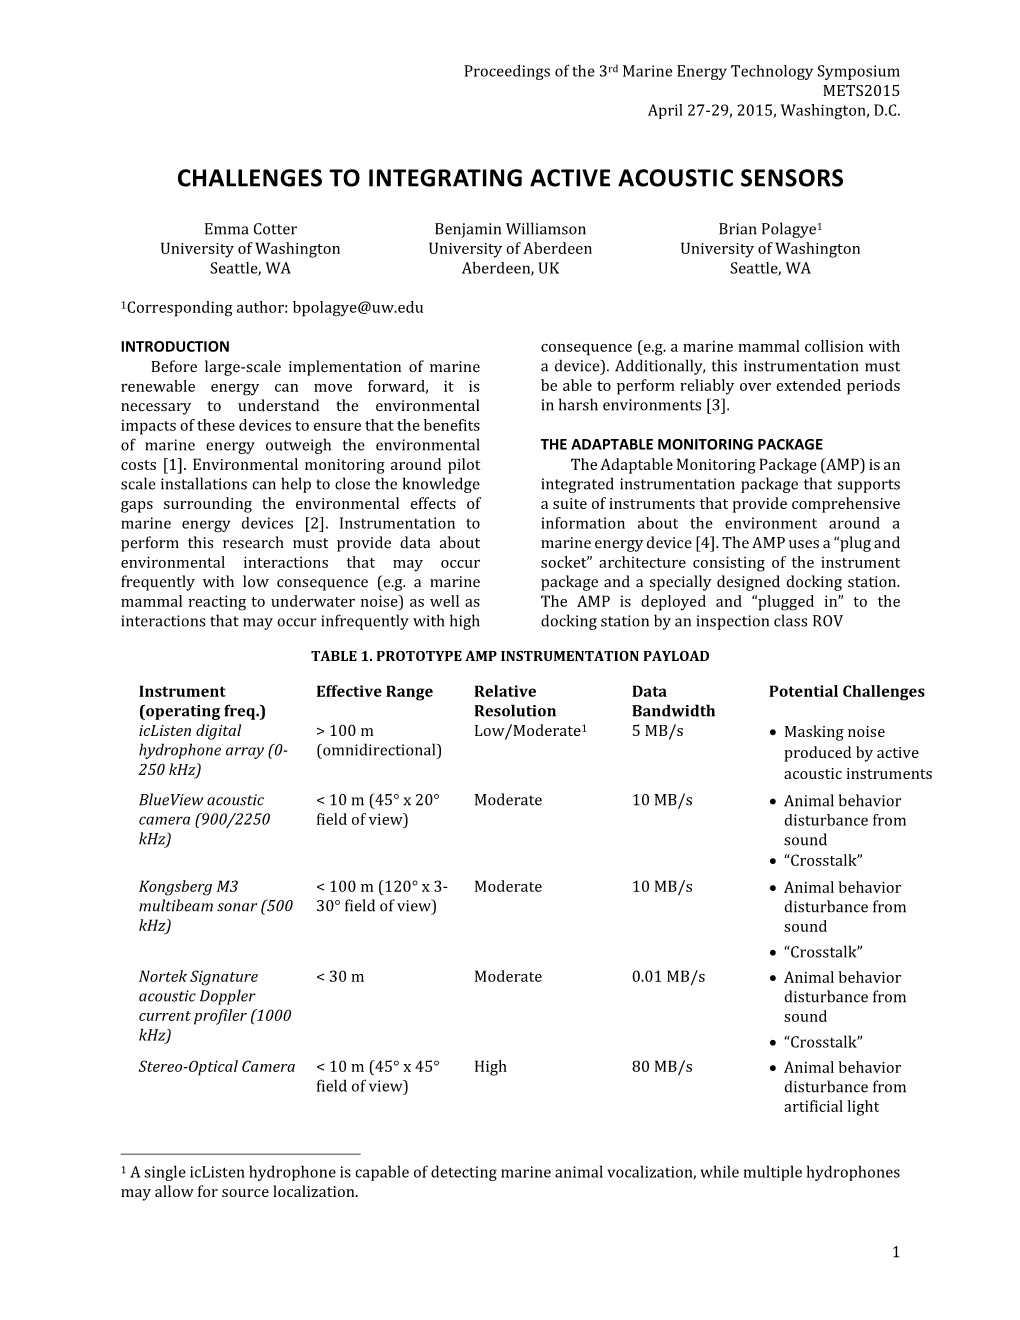 Challenges to Integrating Active Acoustic Sensors